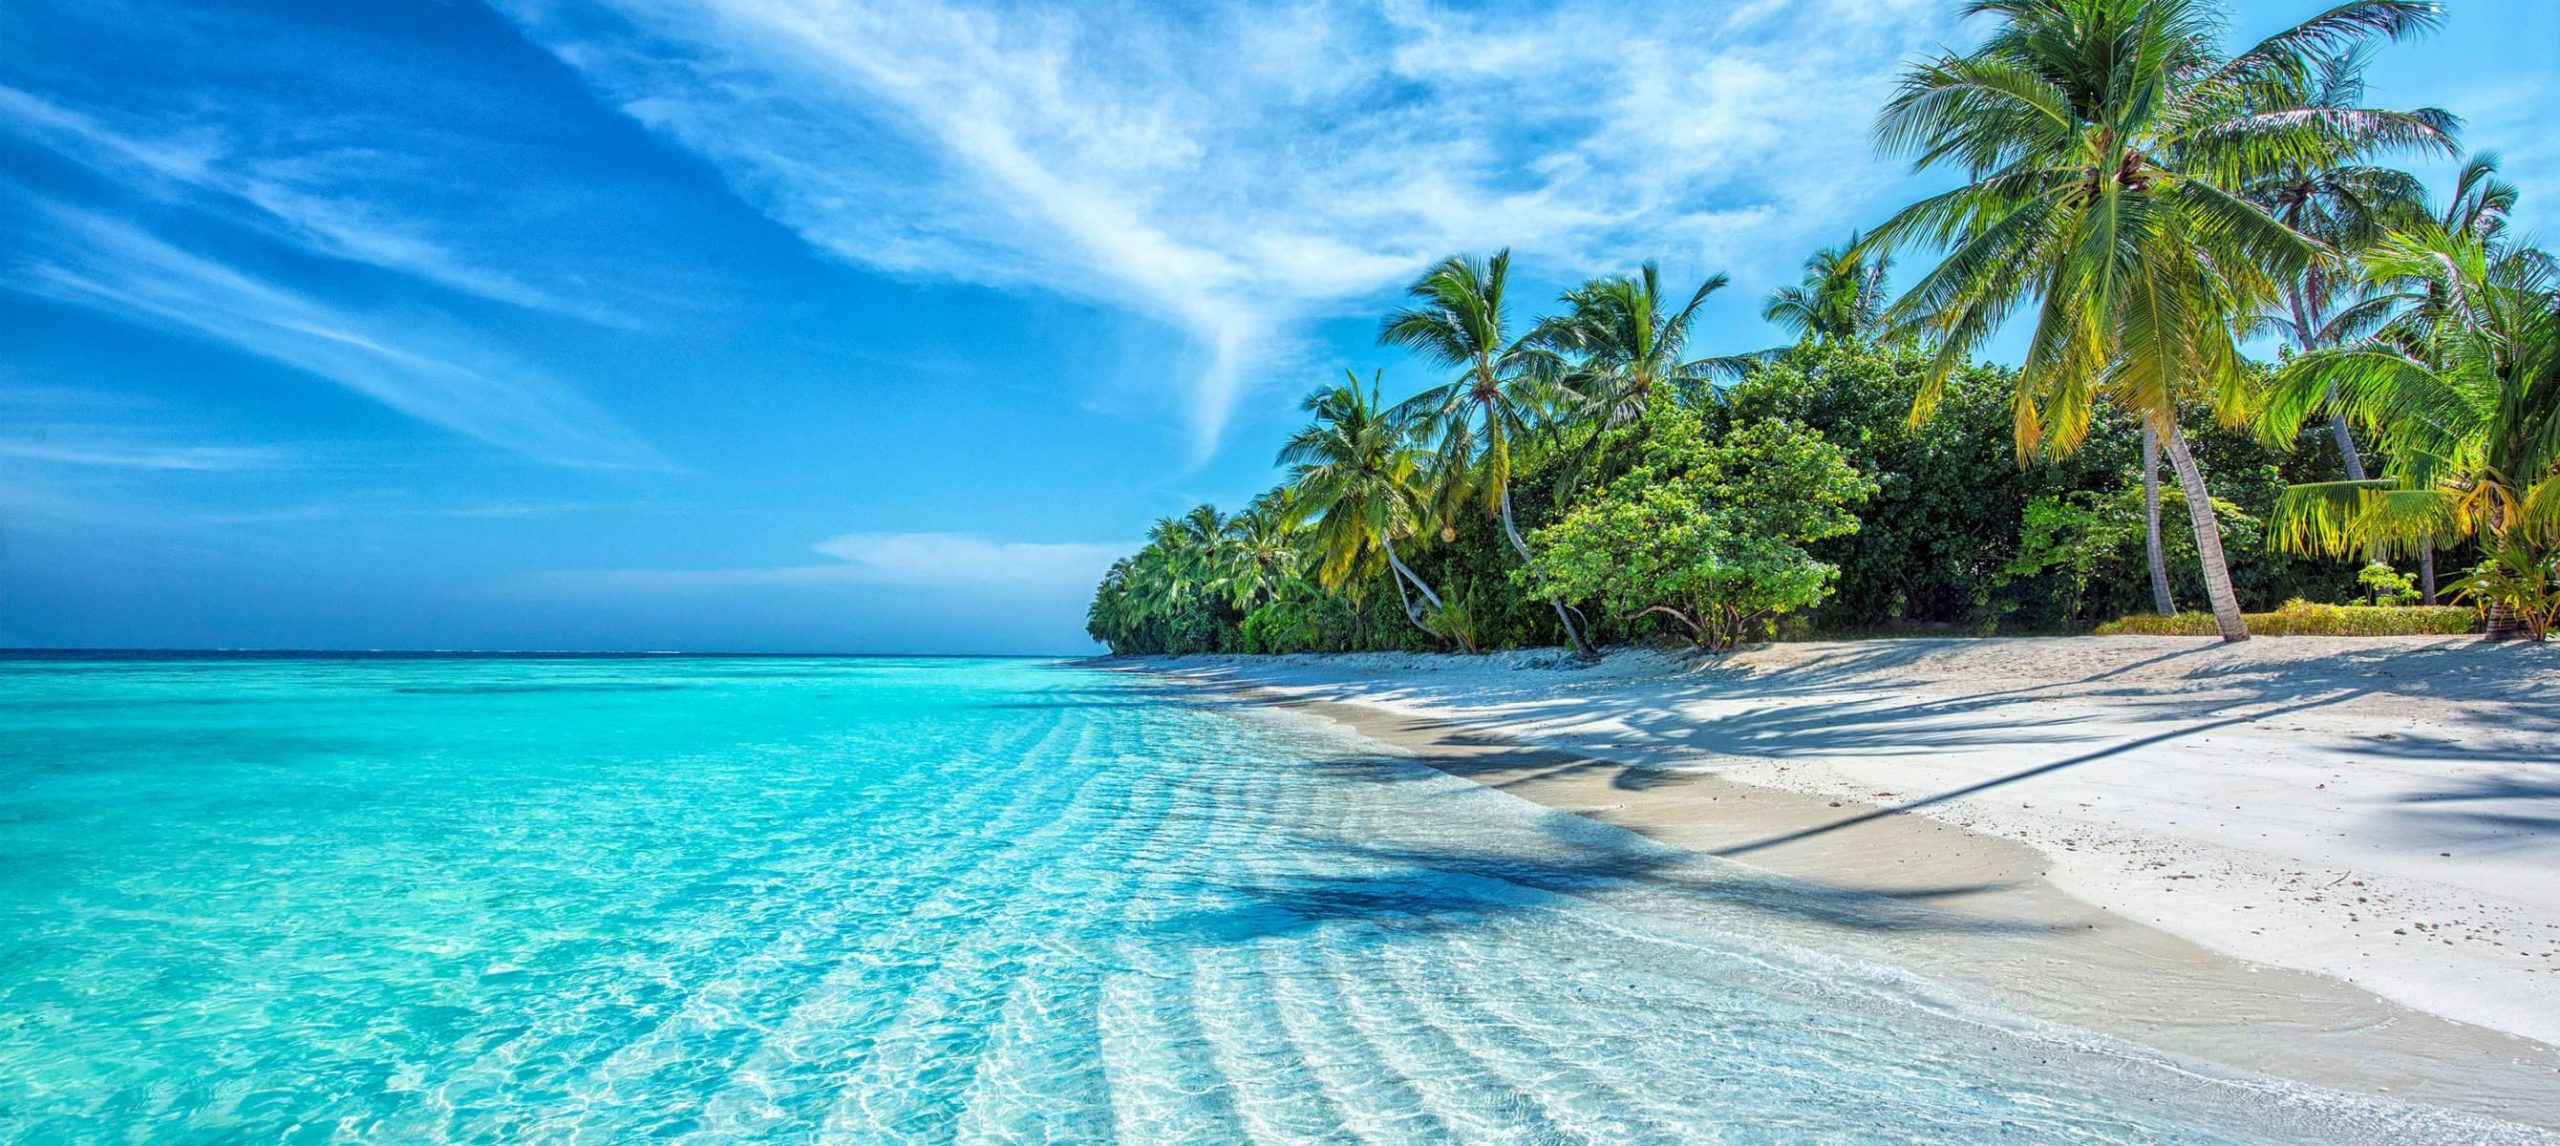 A paradisiac beach surrounded by palm trees.